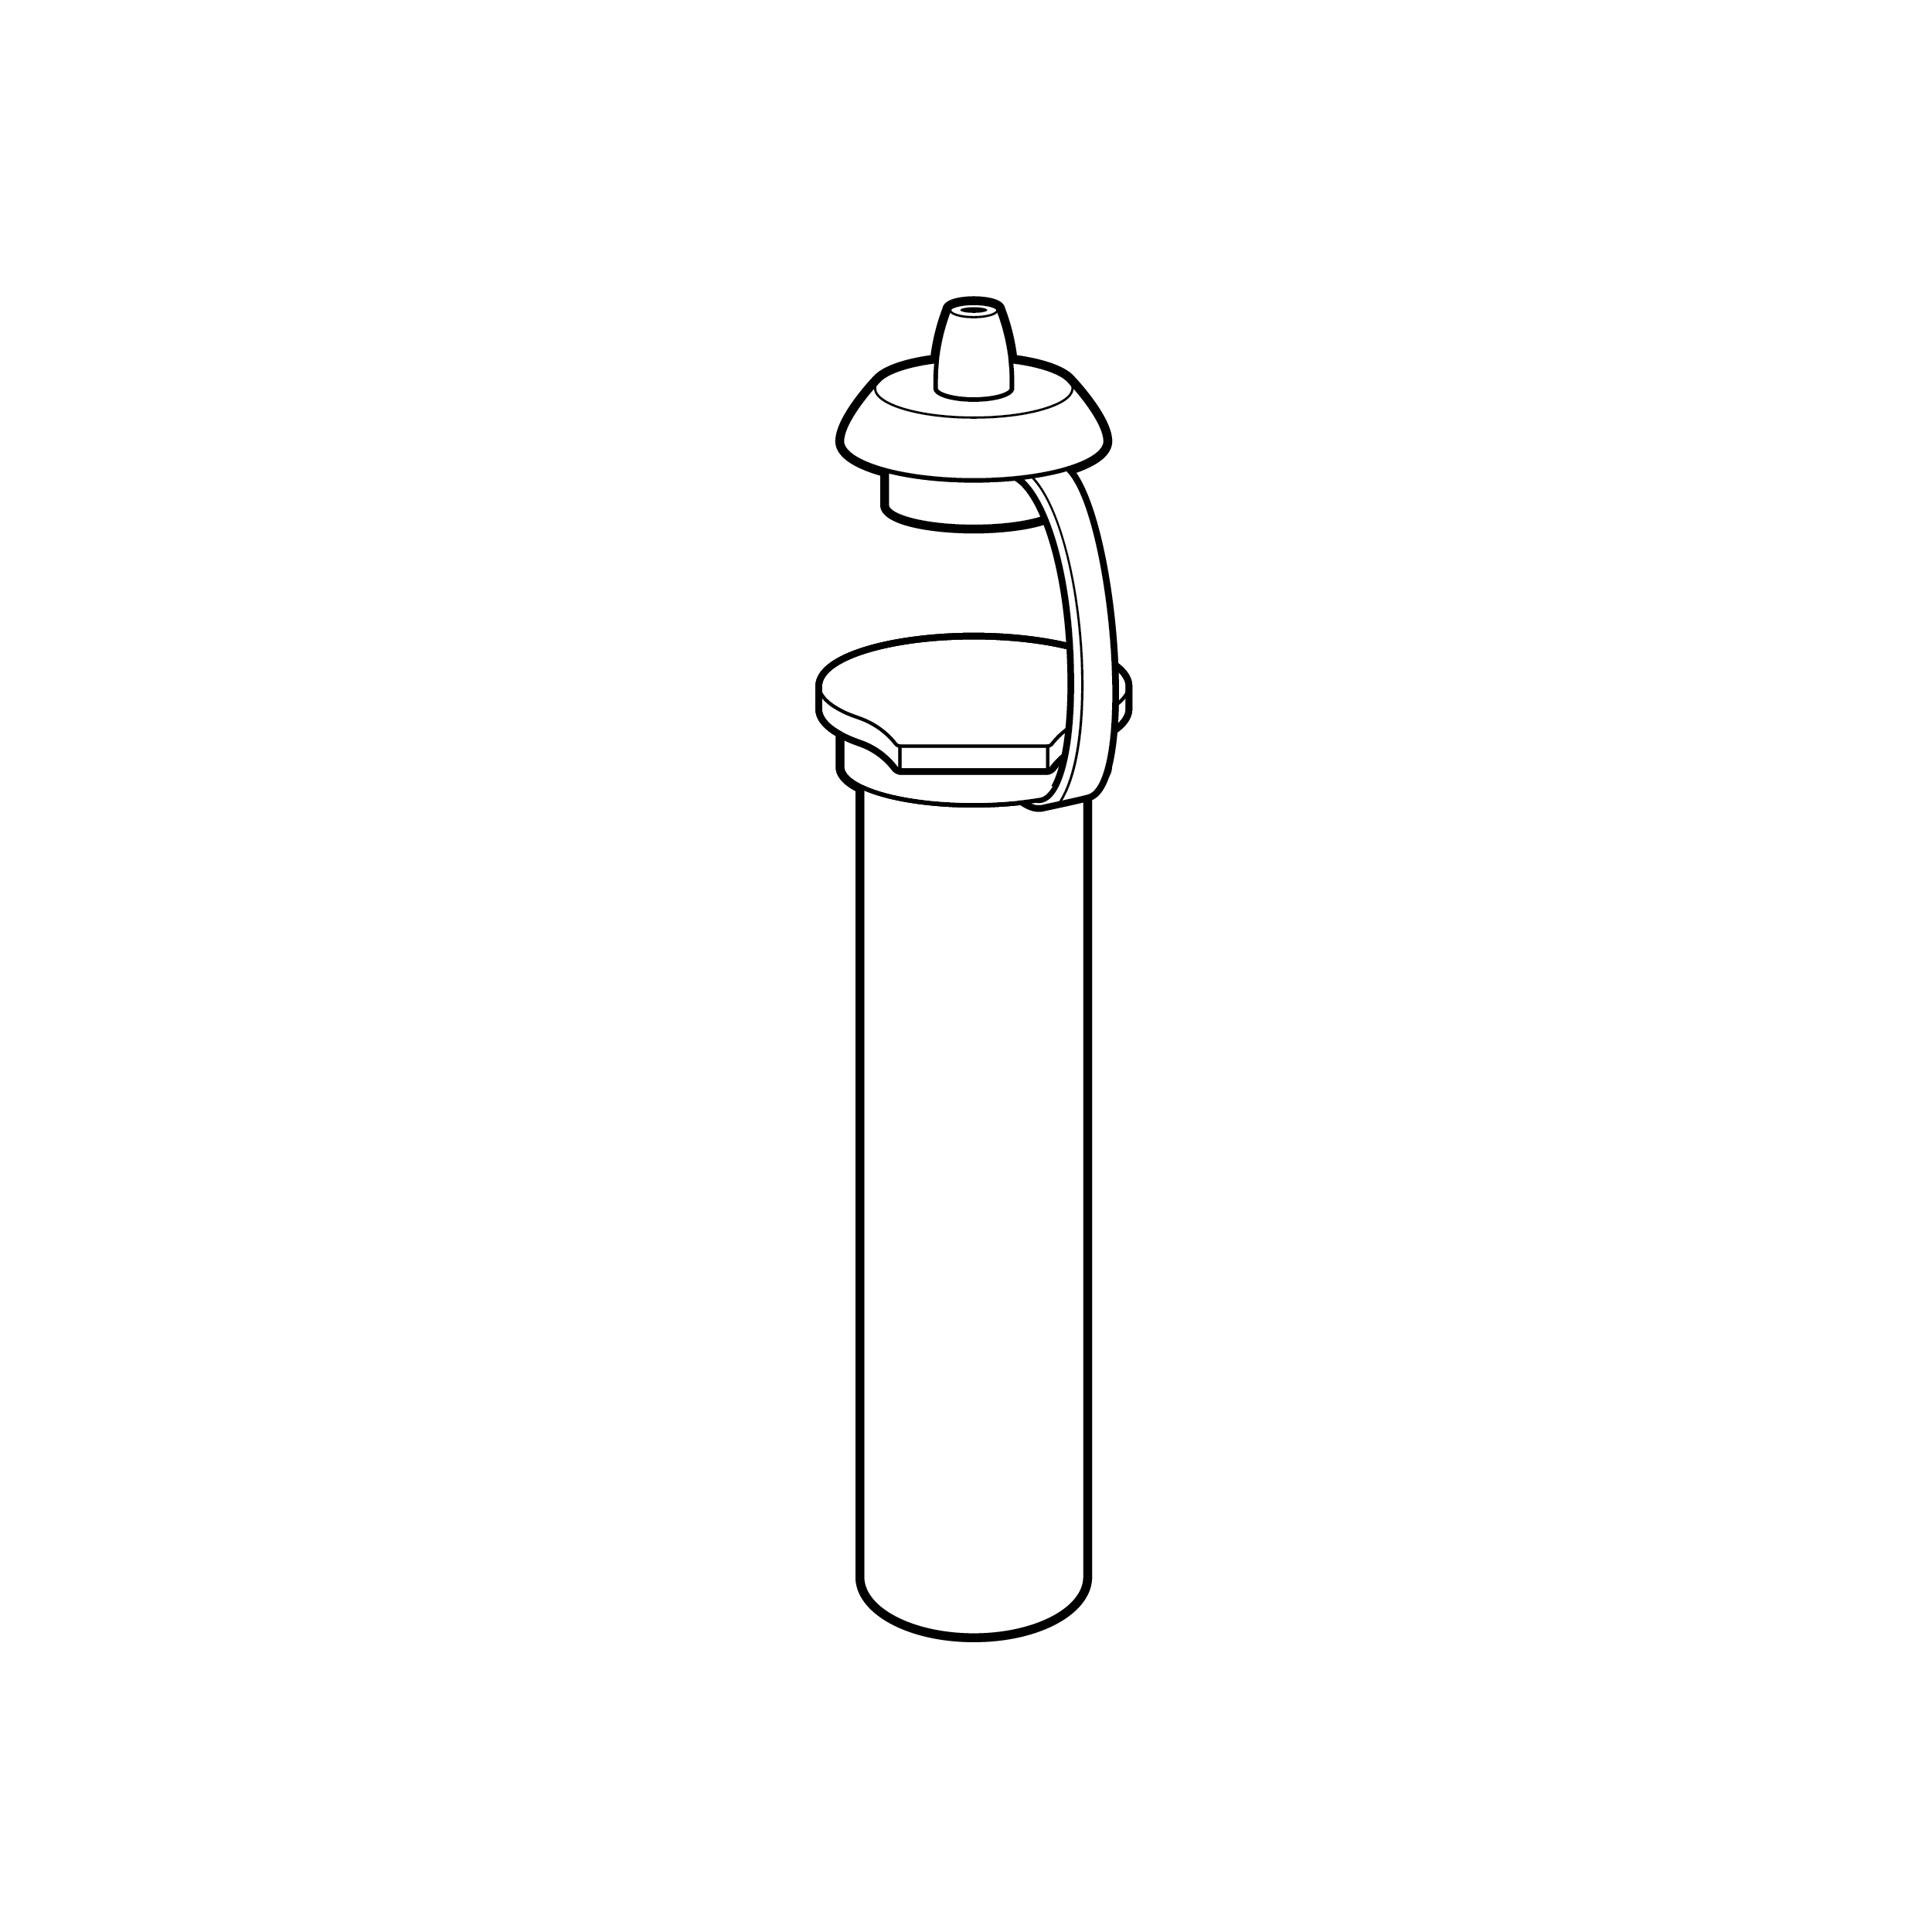 Black perspective line drawing of a fluid vial with an integrated dropper cap.